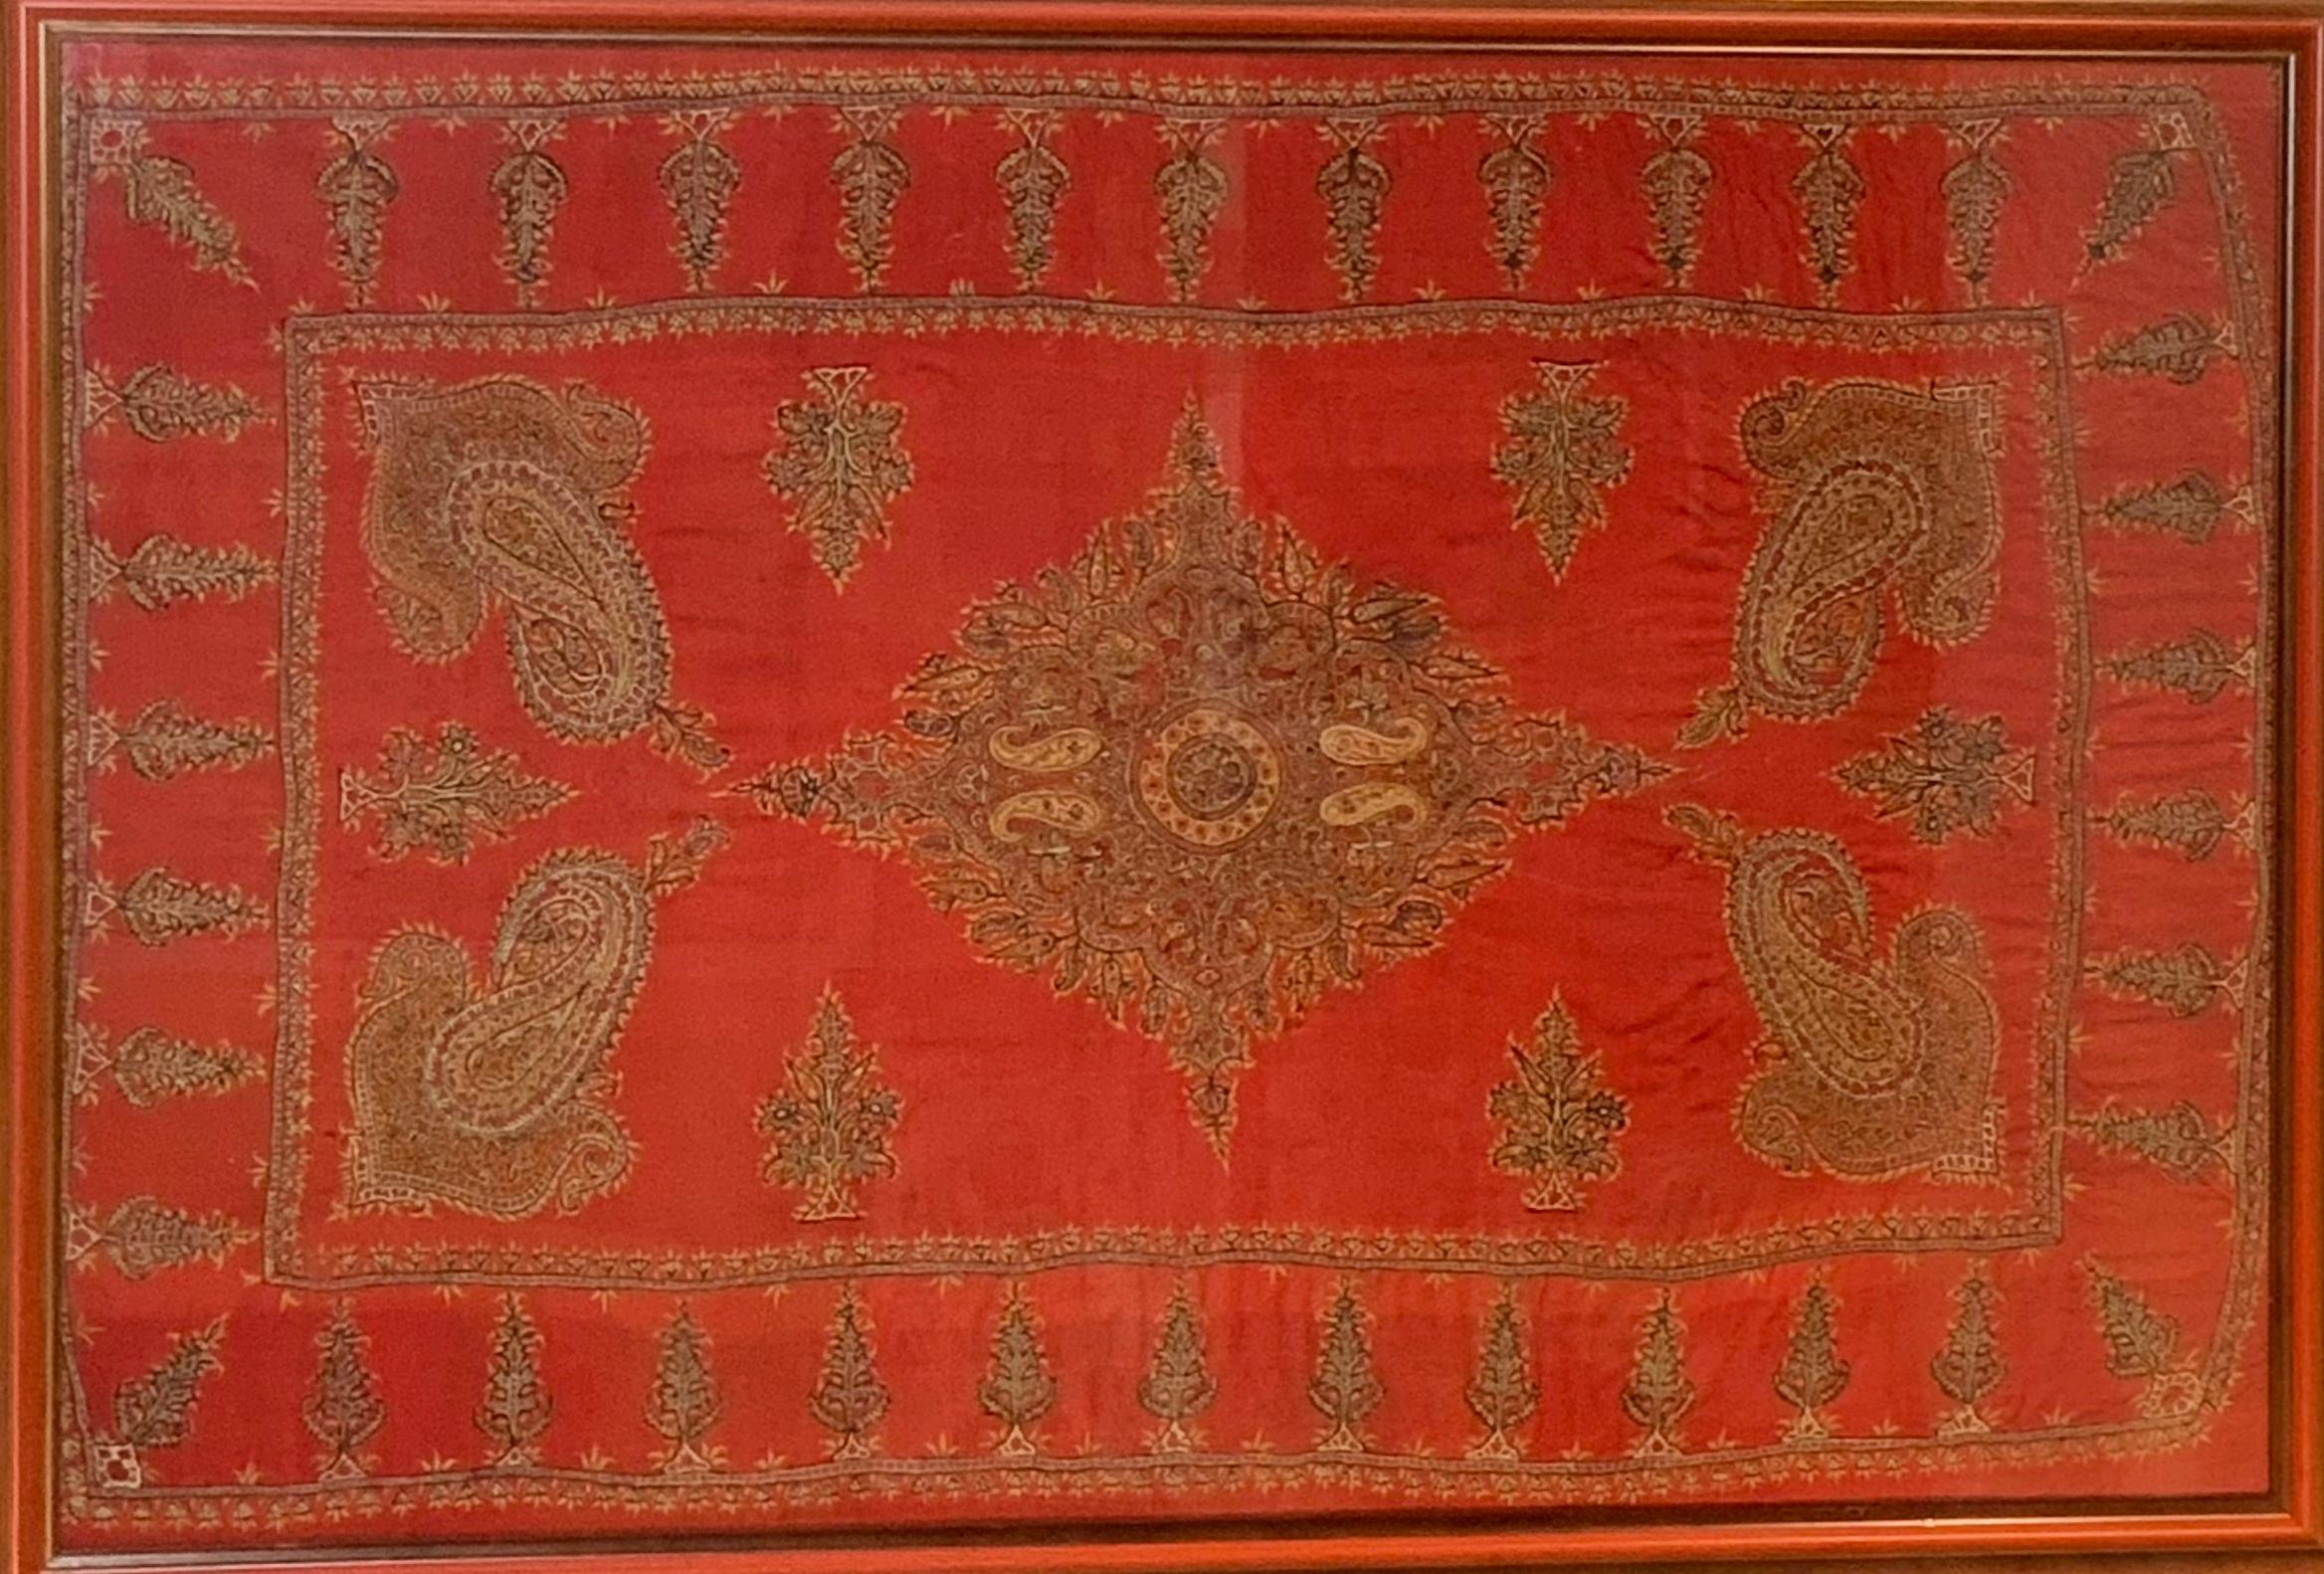 An exceptional early 20th century Kirman wool embroidered Suzani textile with a beautiful pattern of densely embroidered paisley pattern woven in myriad colors of thread surrounding a relatively empty field containing large four paisley shape, and